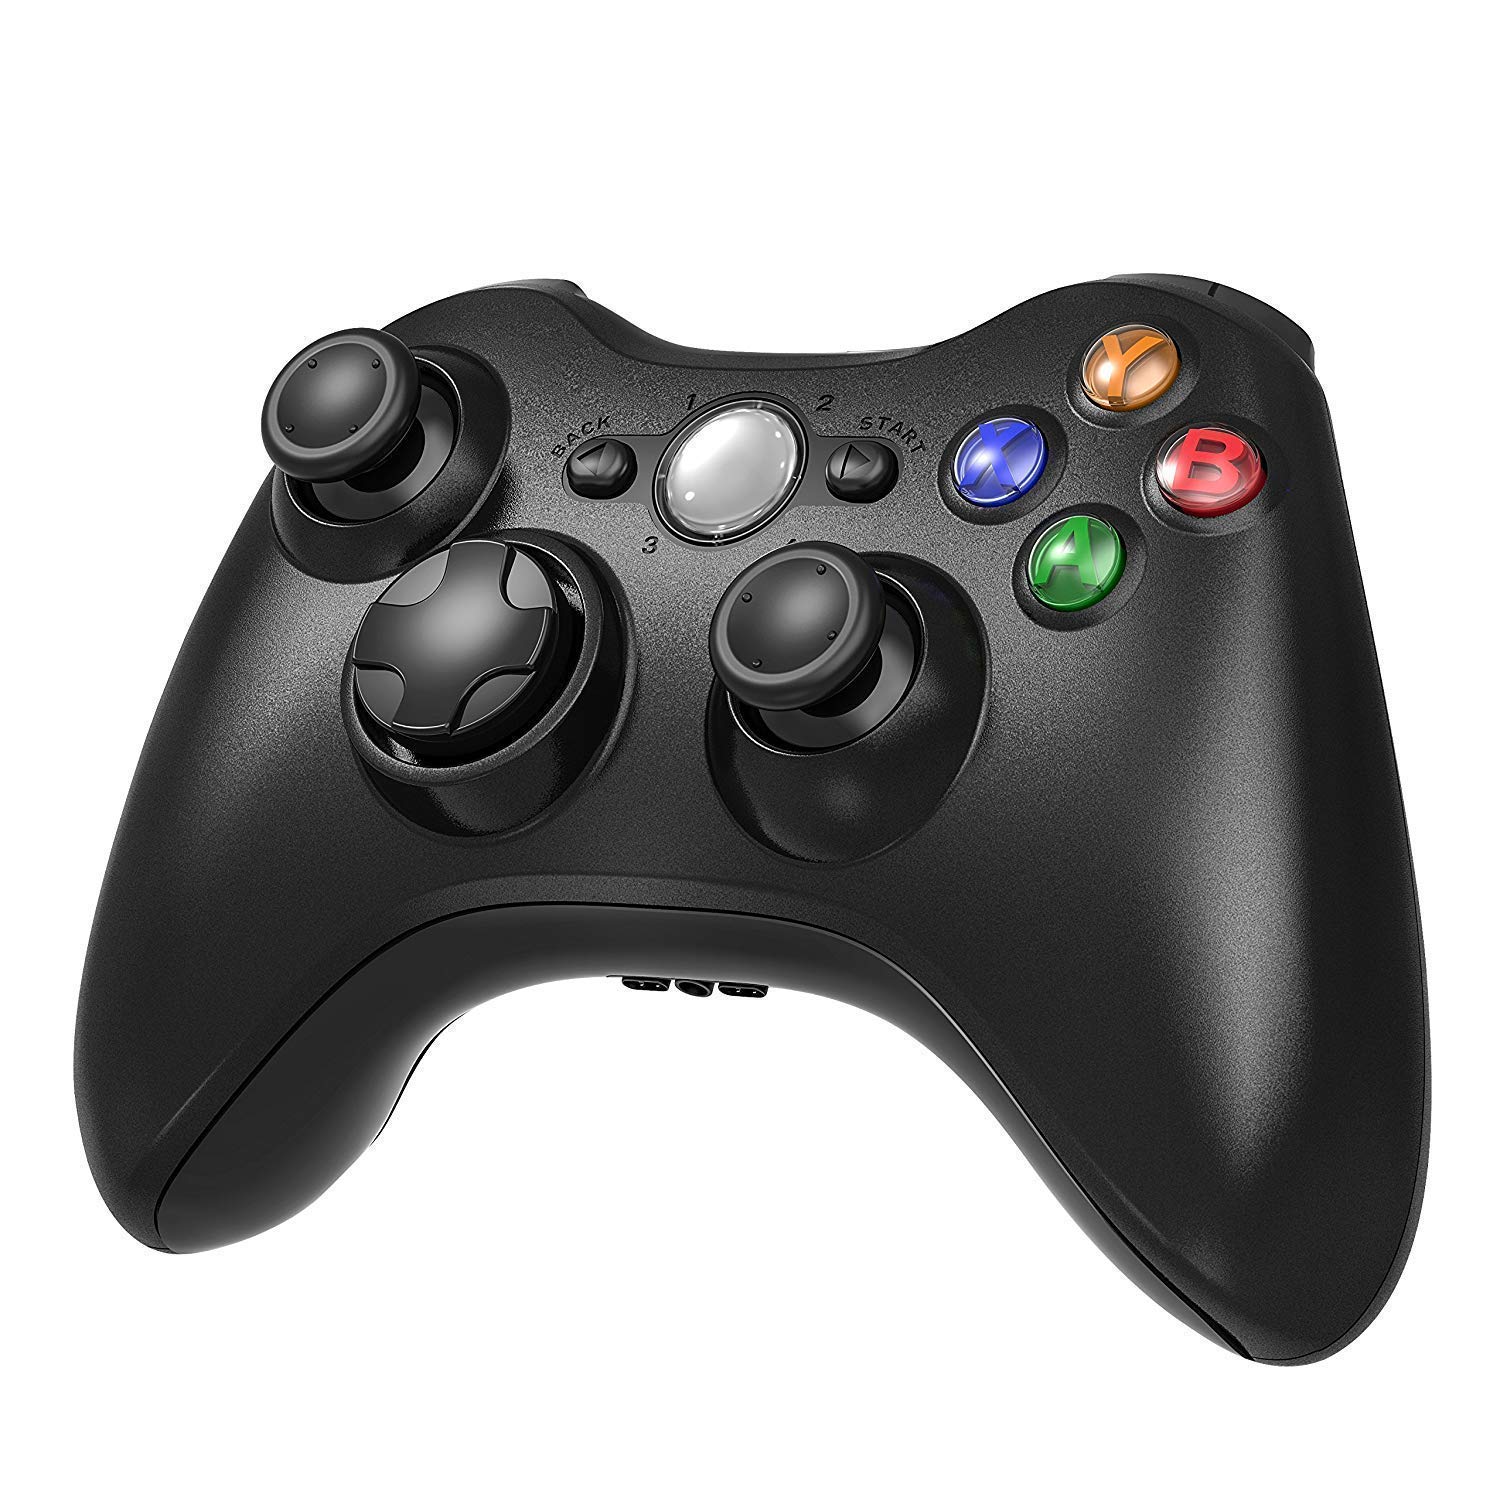 can xbox 360 controller be used as game controller for pc and mac games?